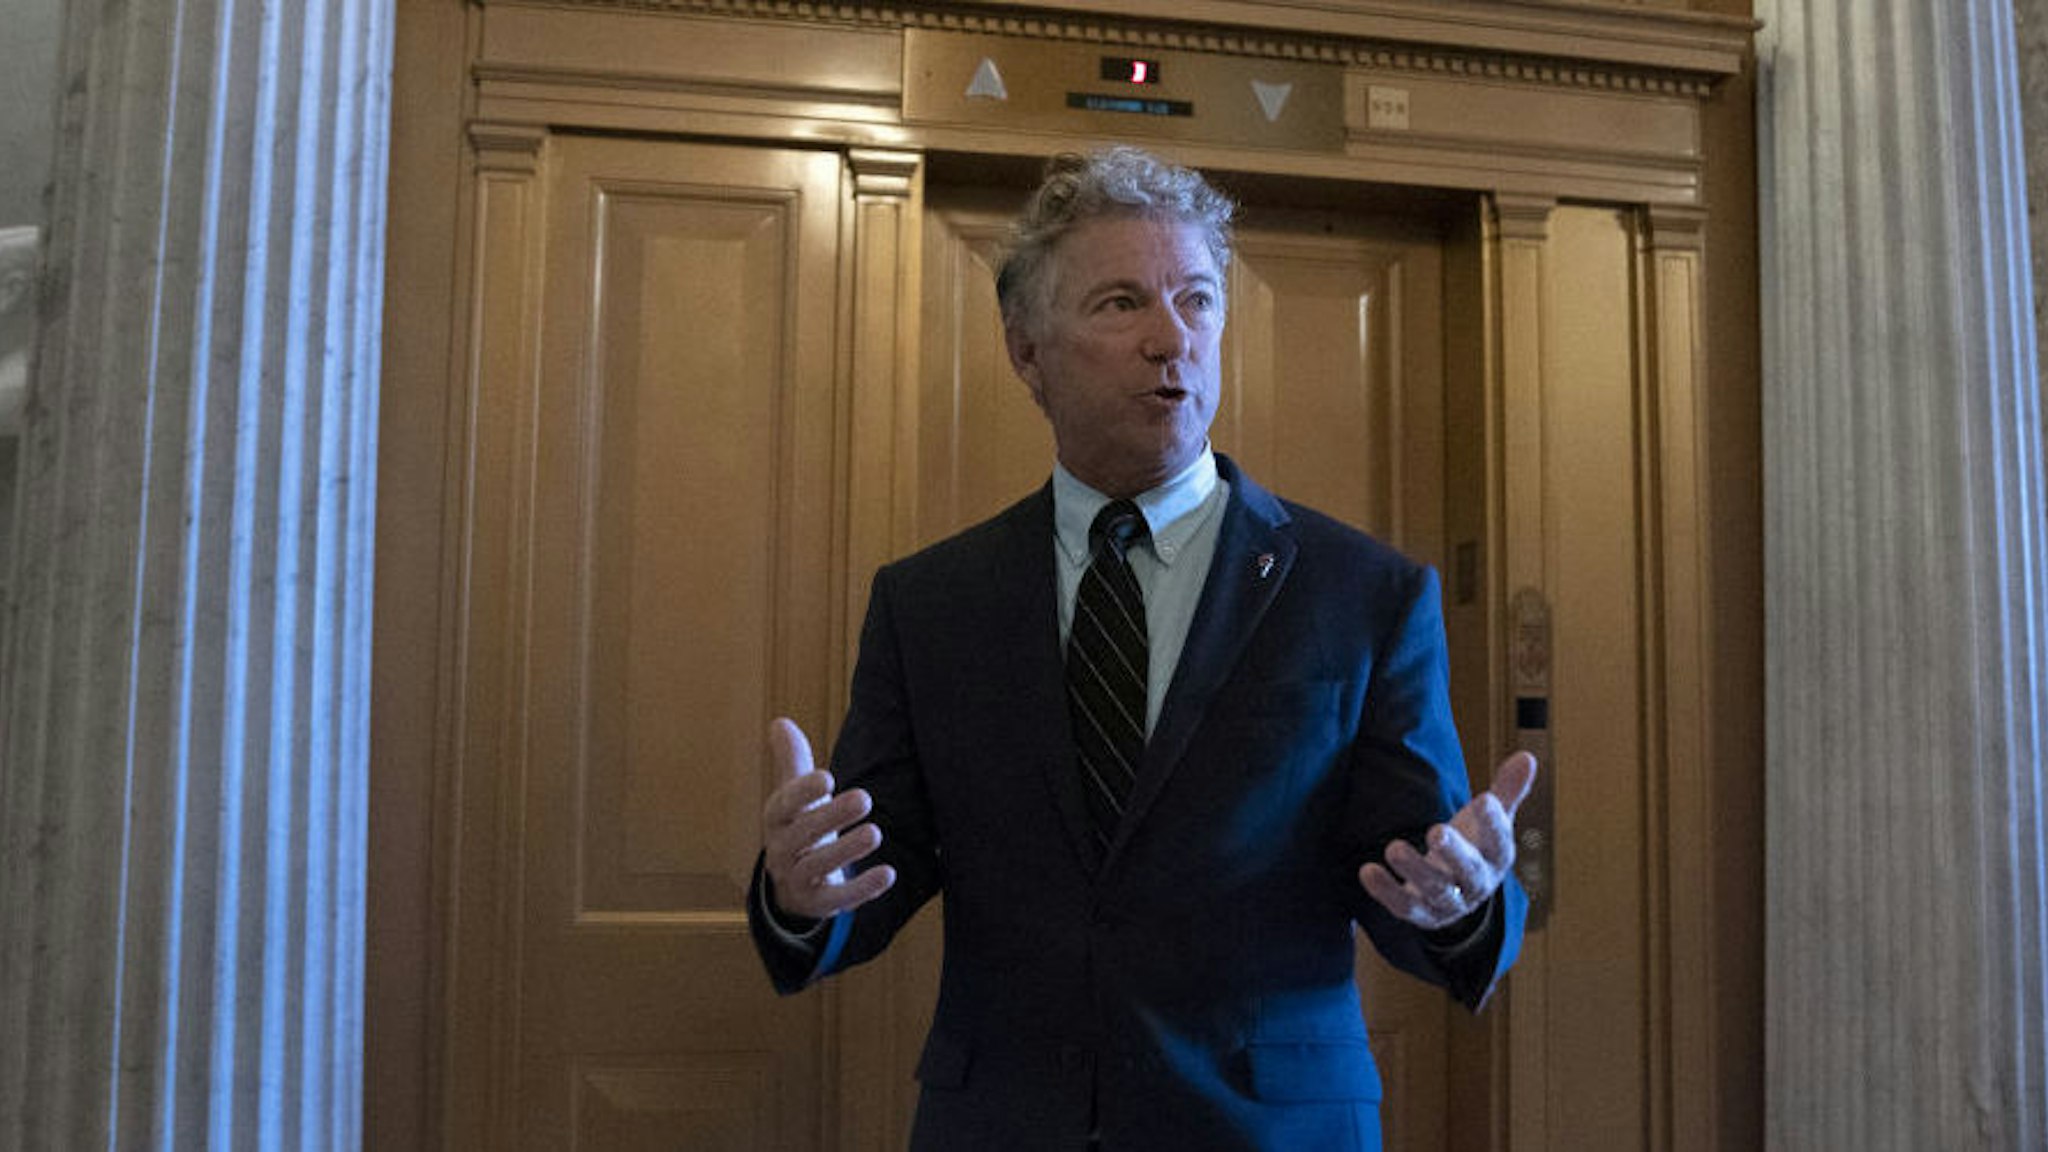 Senator Rand Paul, a Republican from Kentucky, walks to the Senate Chamber for a roll call vote at the U.S. Capitol in Washington, D.C., U.S. on Wednesday, Sept. 30, 2020. House leaders postponed a vote on a Democrat-only stimulus bill to give Treasury Secretary Steven Mnuchin and House Speaker Nancy Pelosi one more day to negotiate a compromise pandemic relief packag